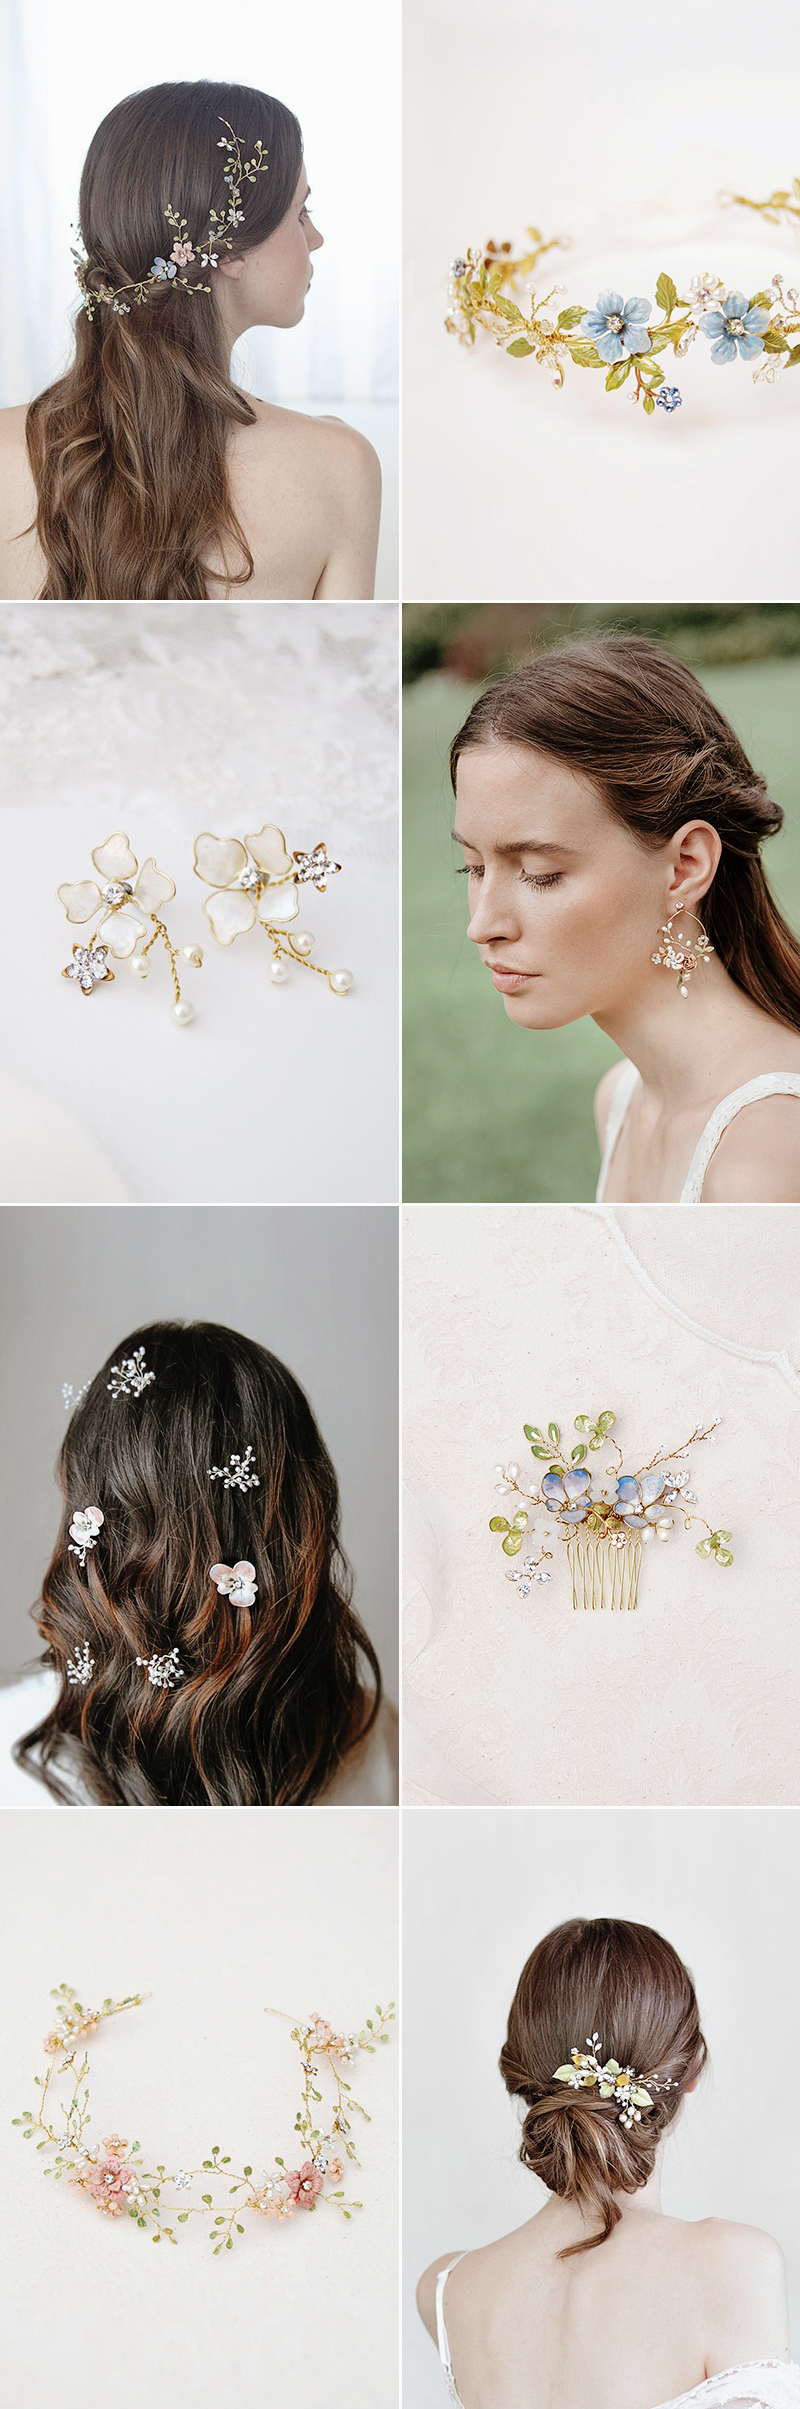 34 Nature-Inspired Bridal Accessories For The Romantic Bride - Praise  Wedding